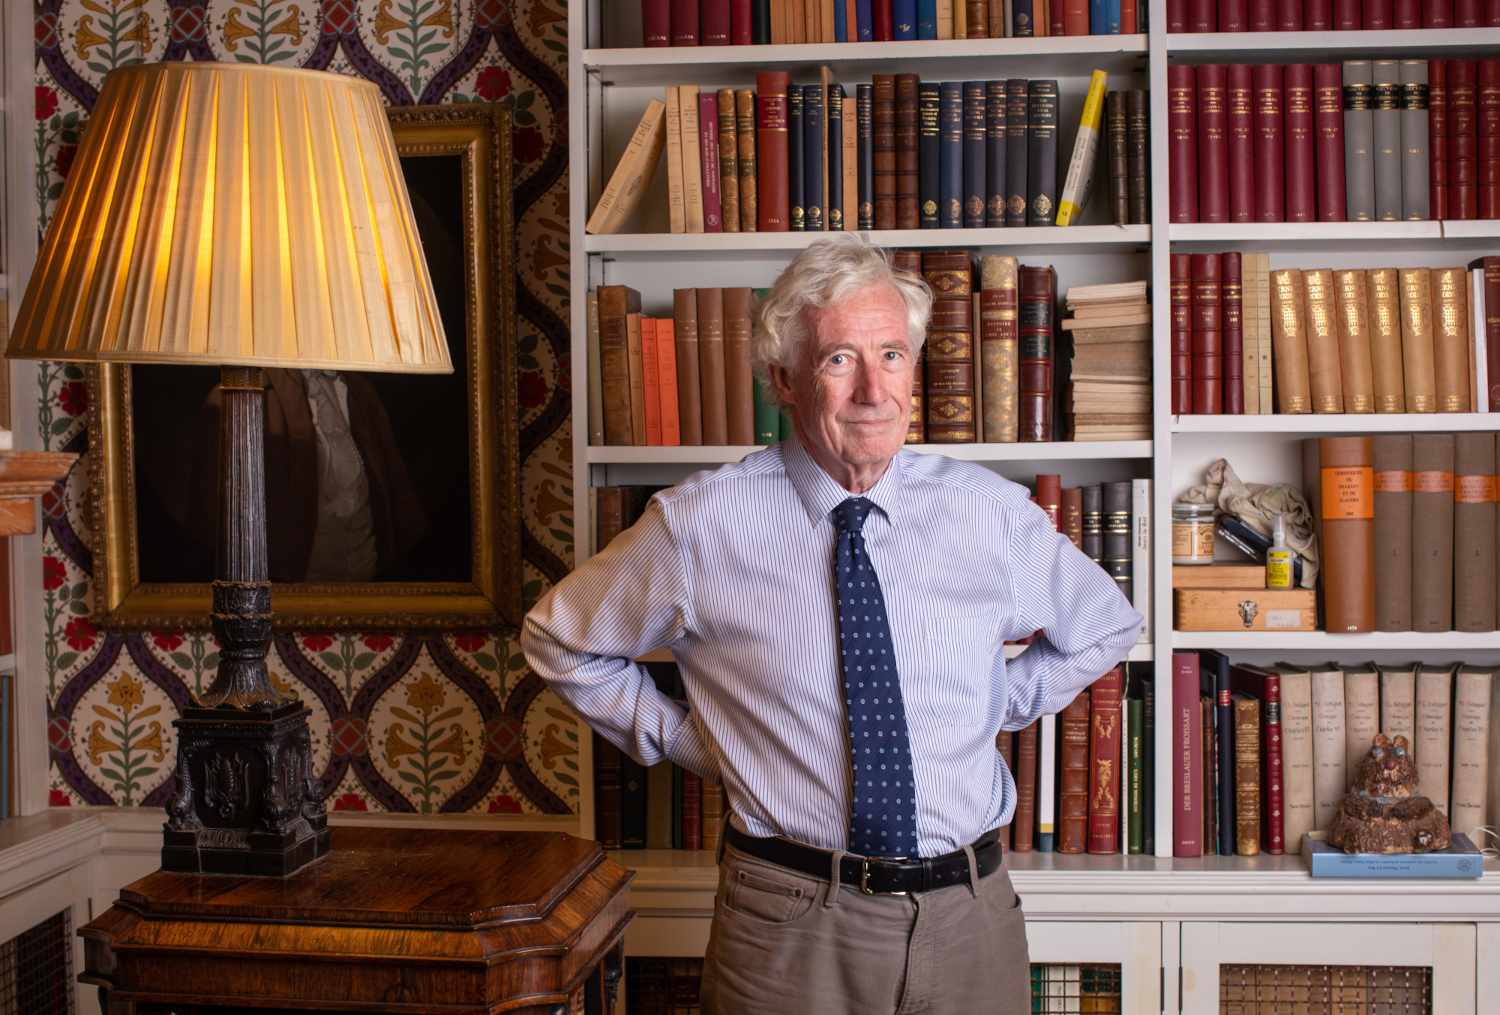 Exclusive: 'We've got to stand up' to cultural puritans, says Lord Sumption